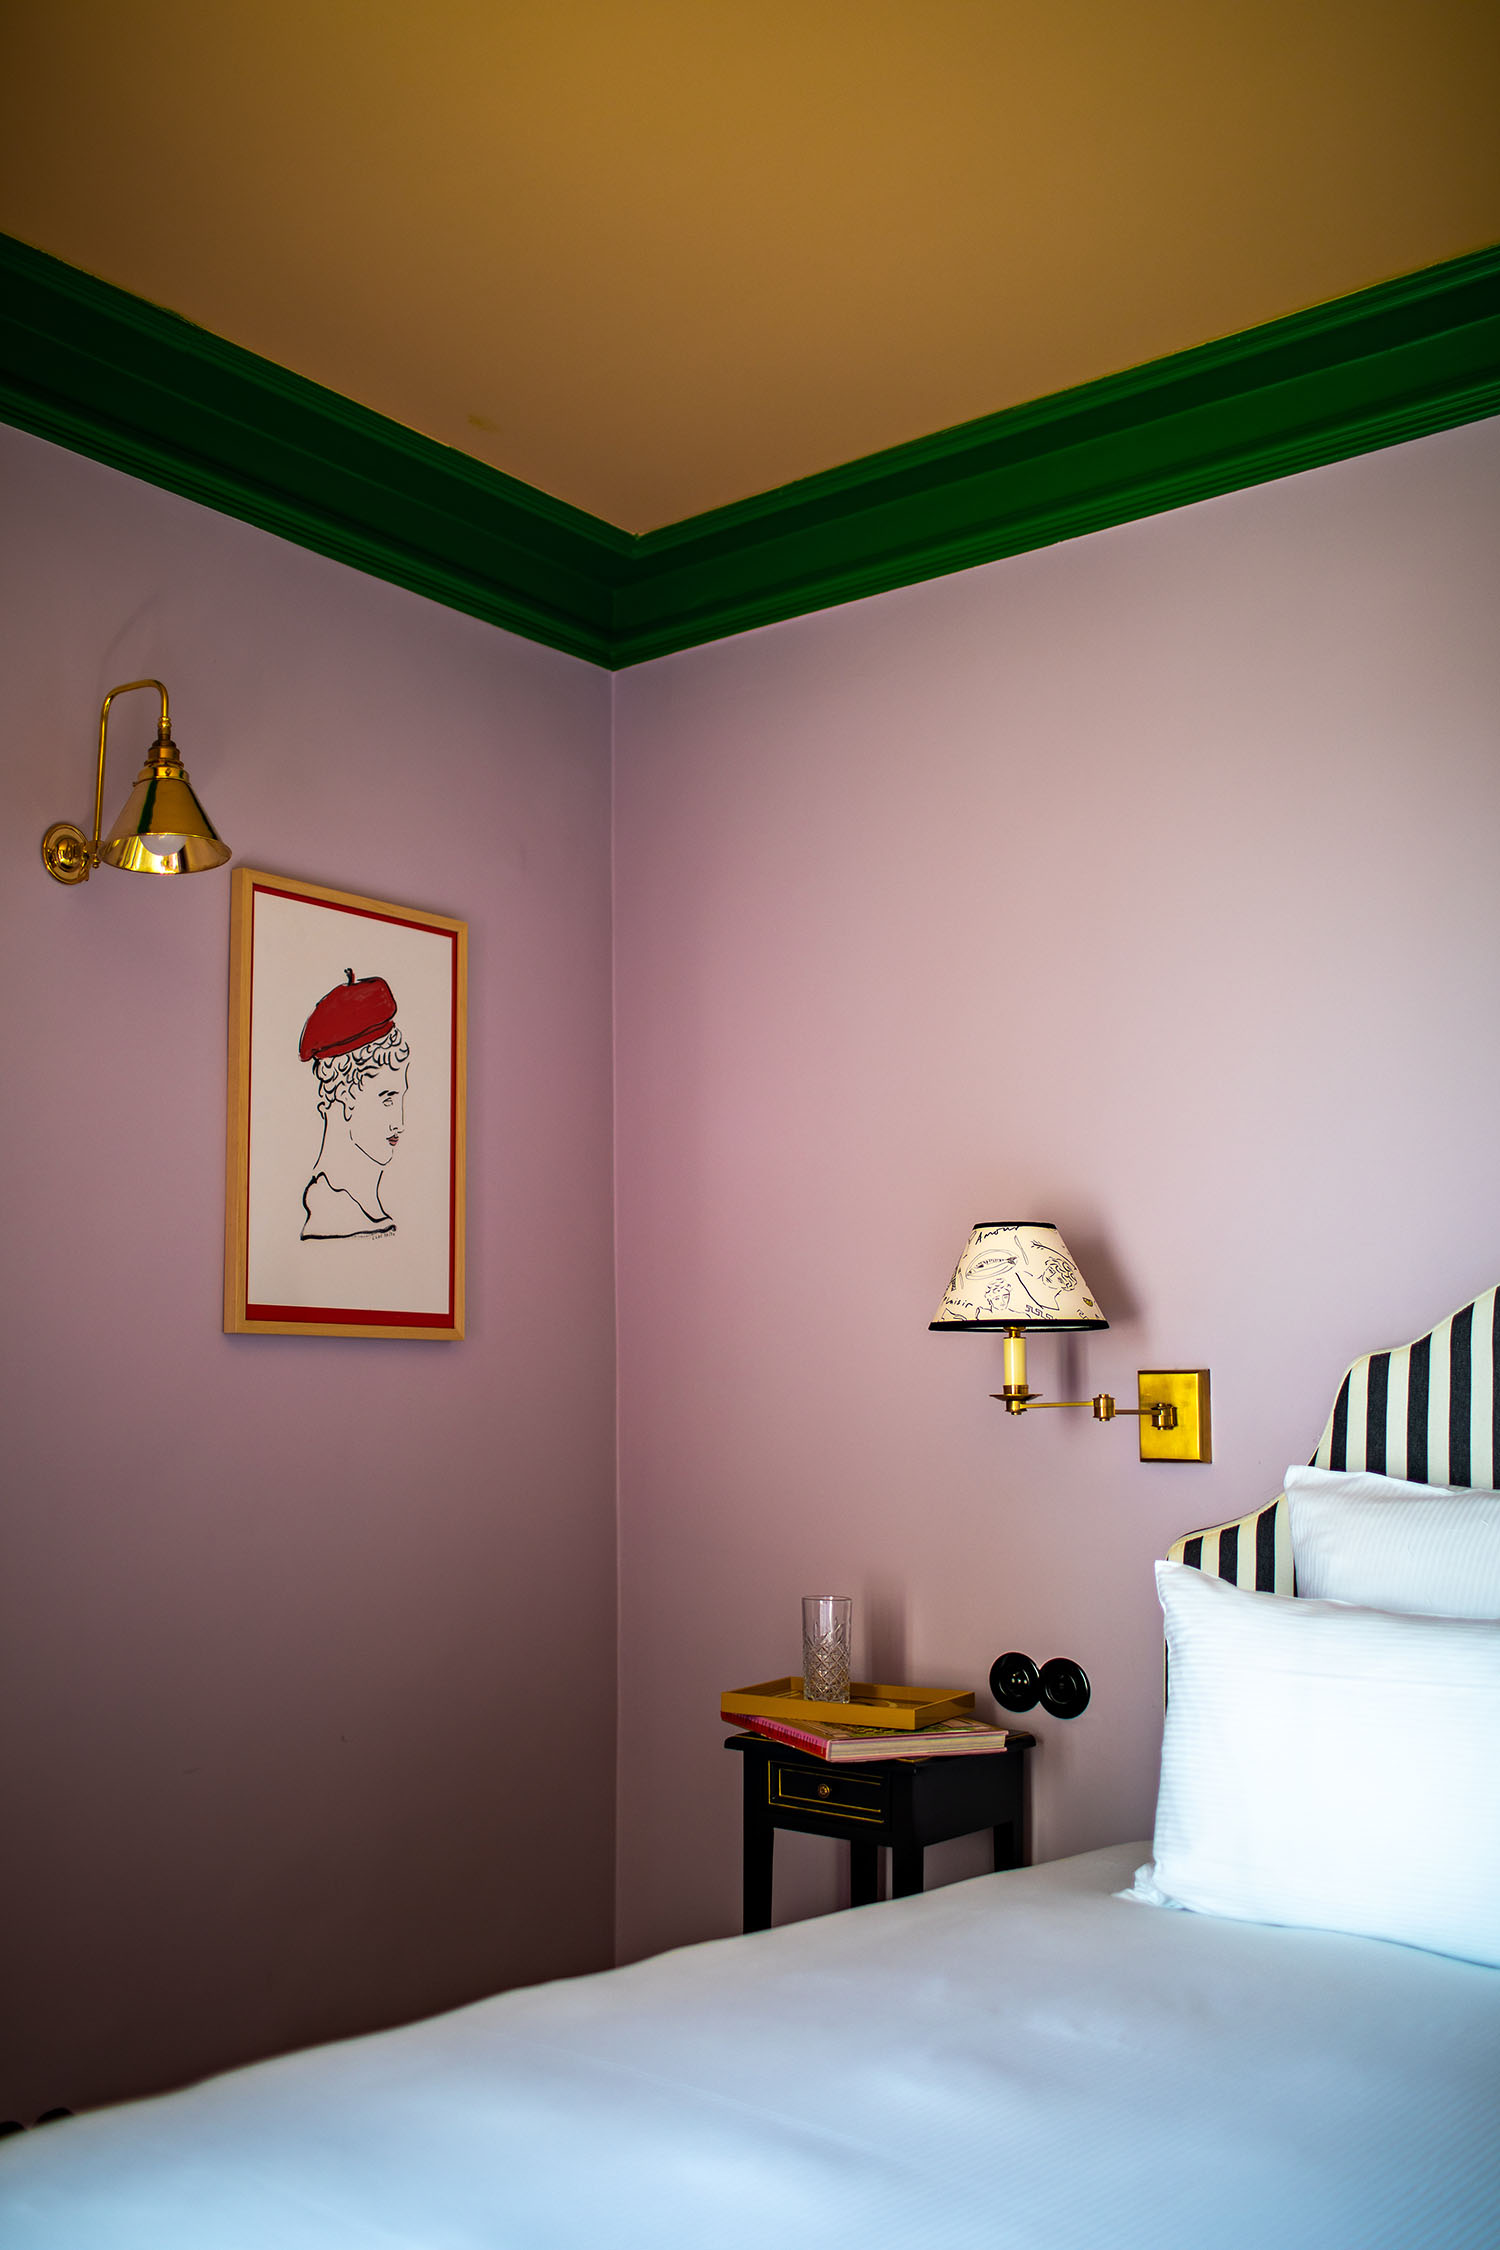 An lavender guest room at Hotel les Deux Gares with a green + white striped headboard, mural-sketched wall lamp shades, and a Greco-Roman inspired wall illustration featuring a red beret